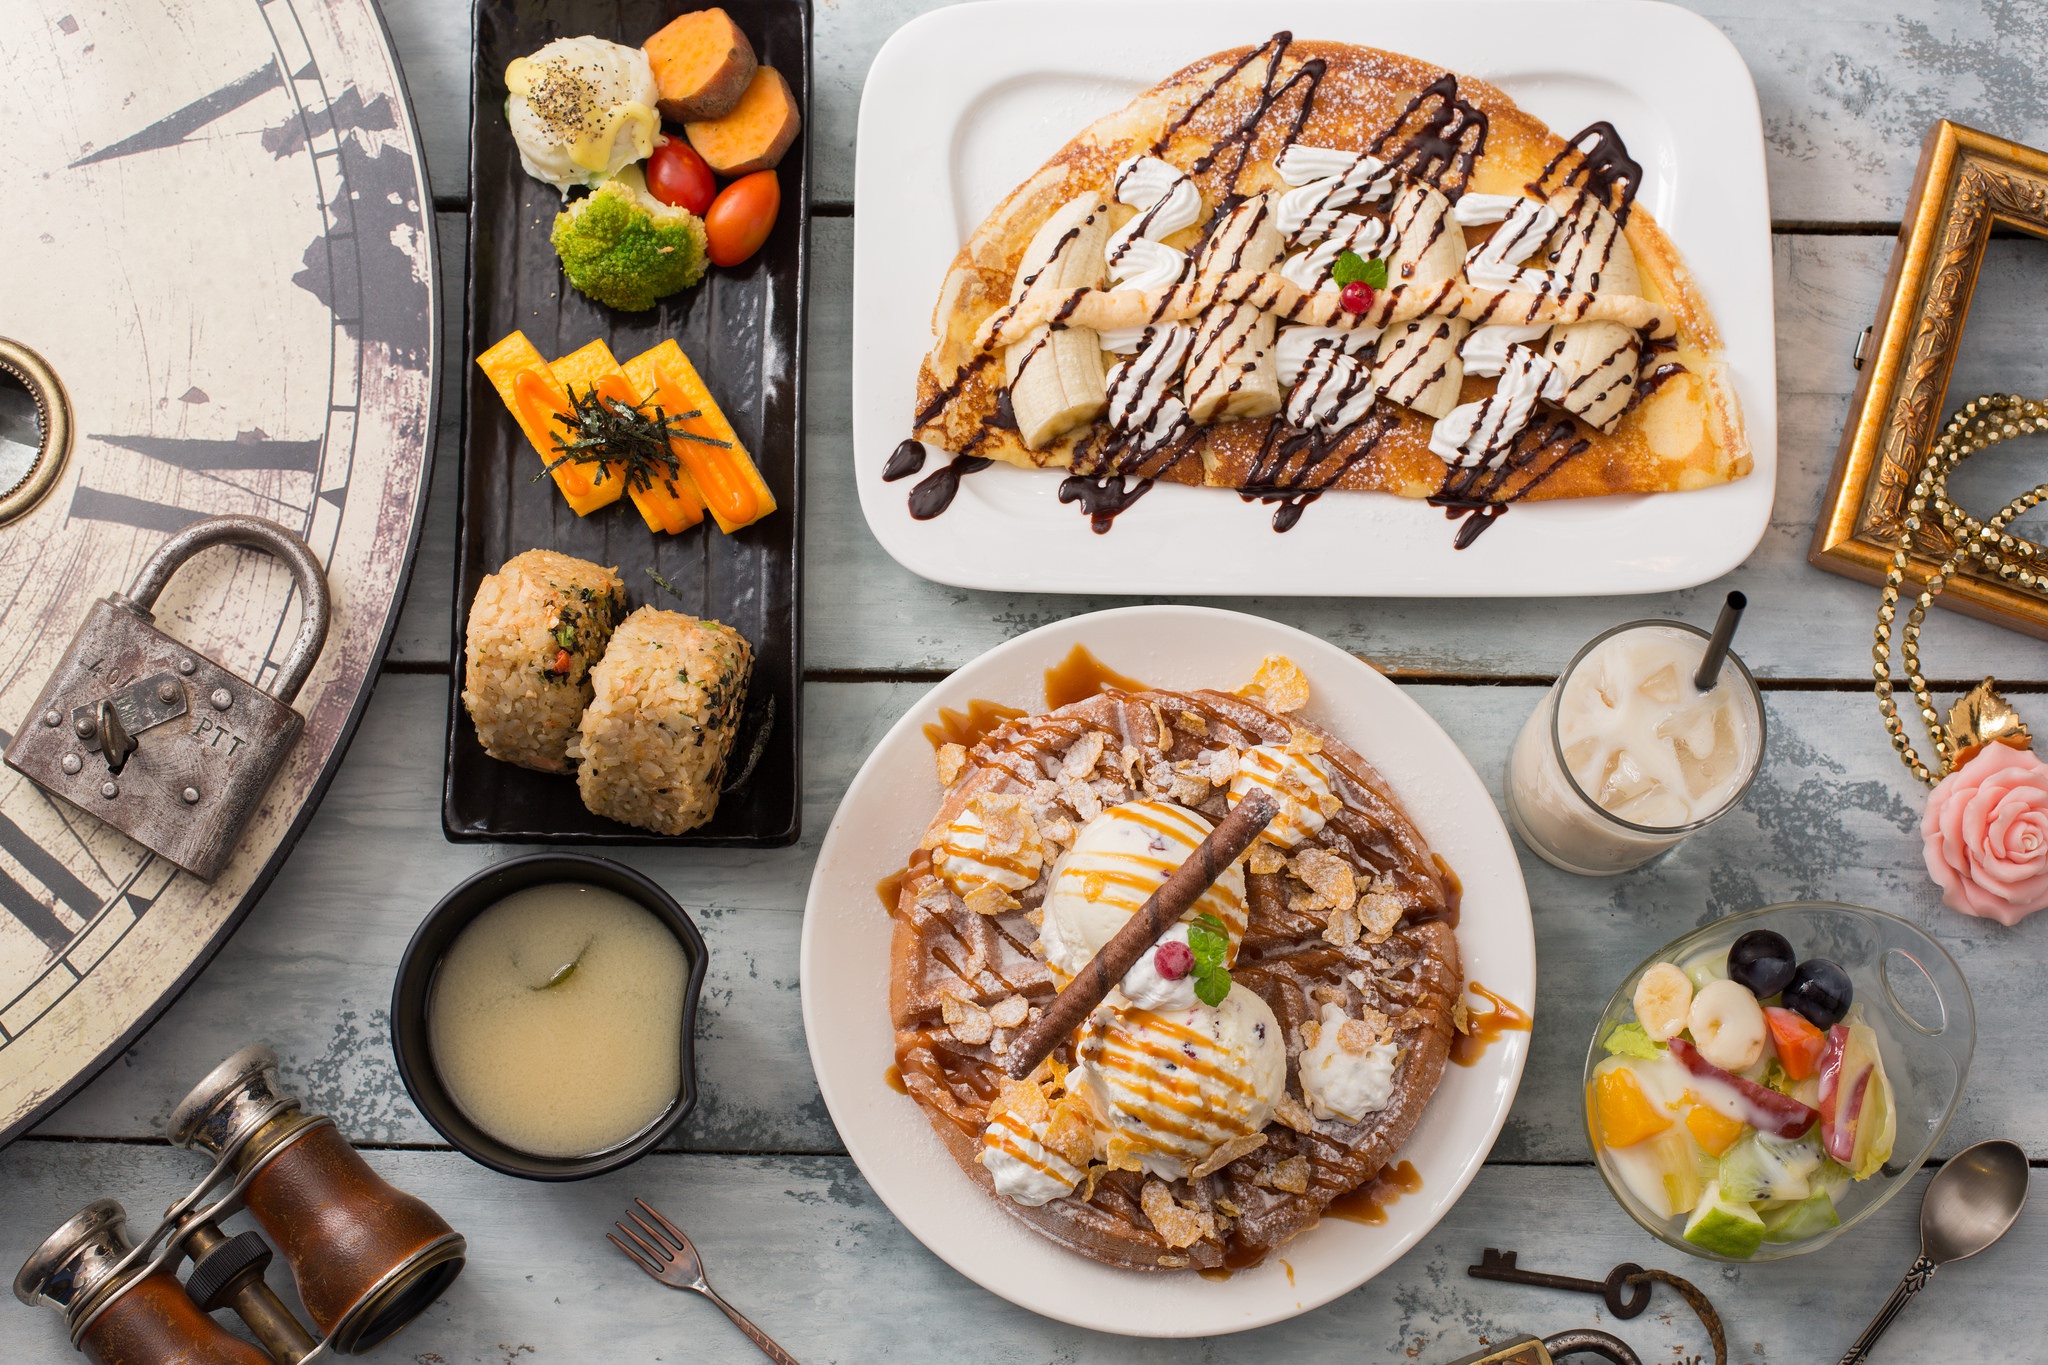 Food Ice Cream Sweets Crepes Waffles Flowers Cinnamon Chocolate Sauce Wooden Surface 2048x1365